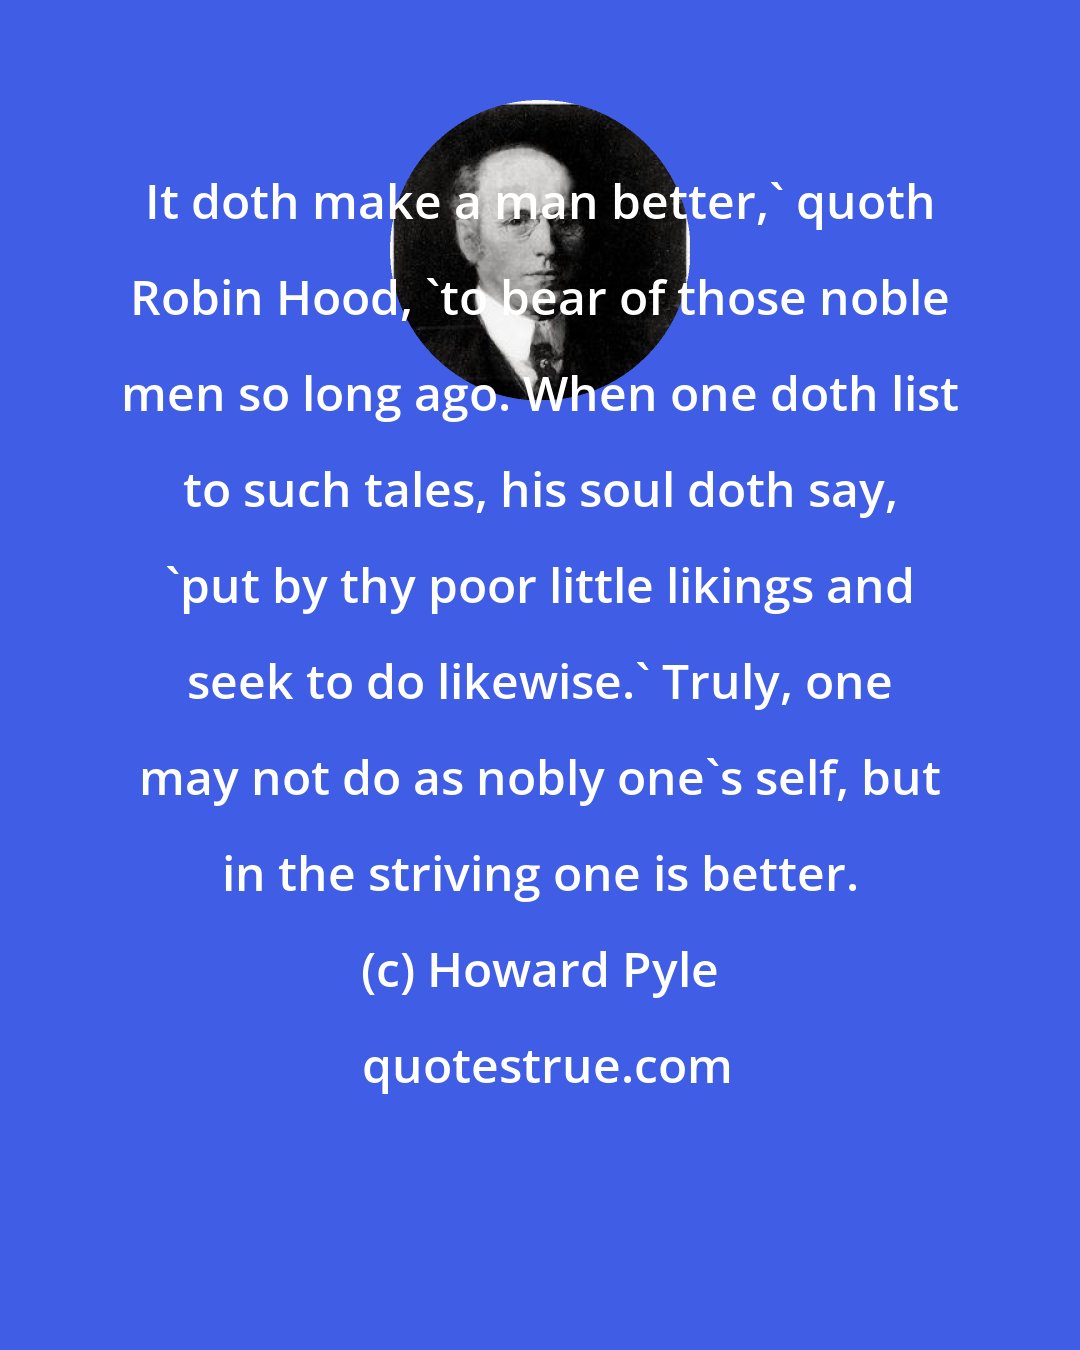 Howard Pyle: It doth make a man better,' quoth Robin Hood, 'to bear of those noble men so long ago. When one doth list to such tales, his soul doth say, 'put by thy poor little likings and seek to do likewise.' Truly, one may not do as nobly one's self, but in the striving one is better.